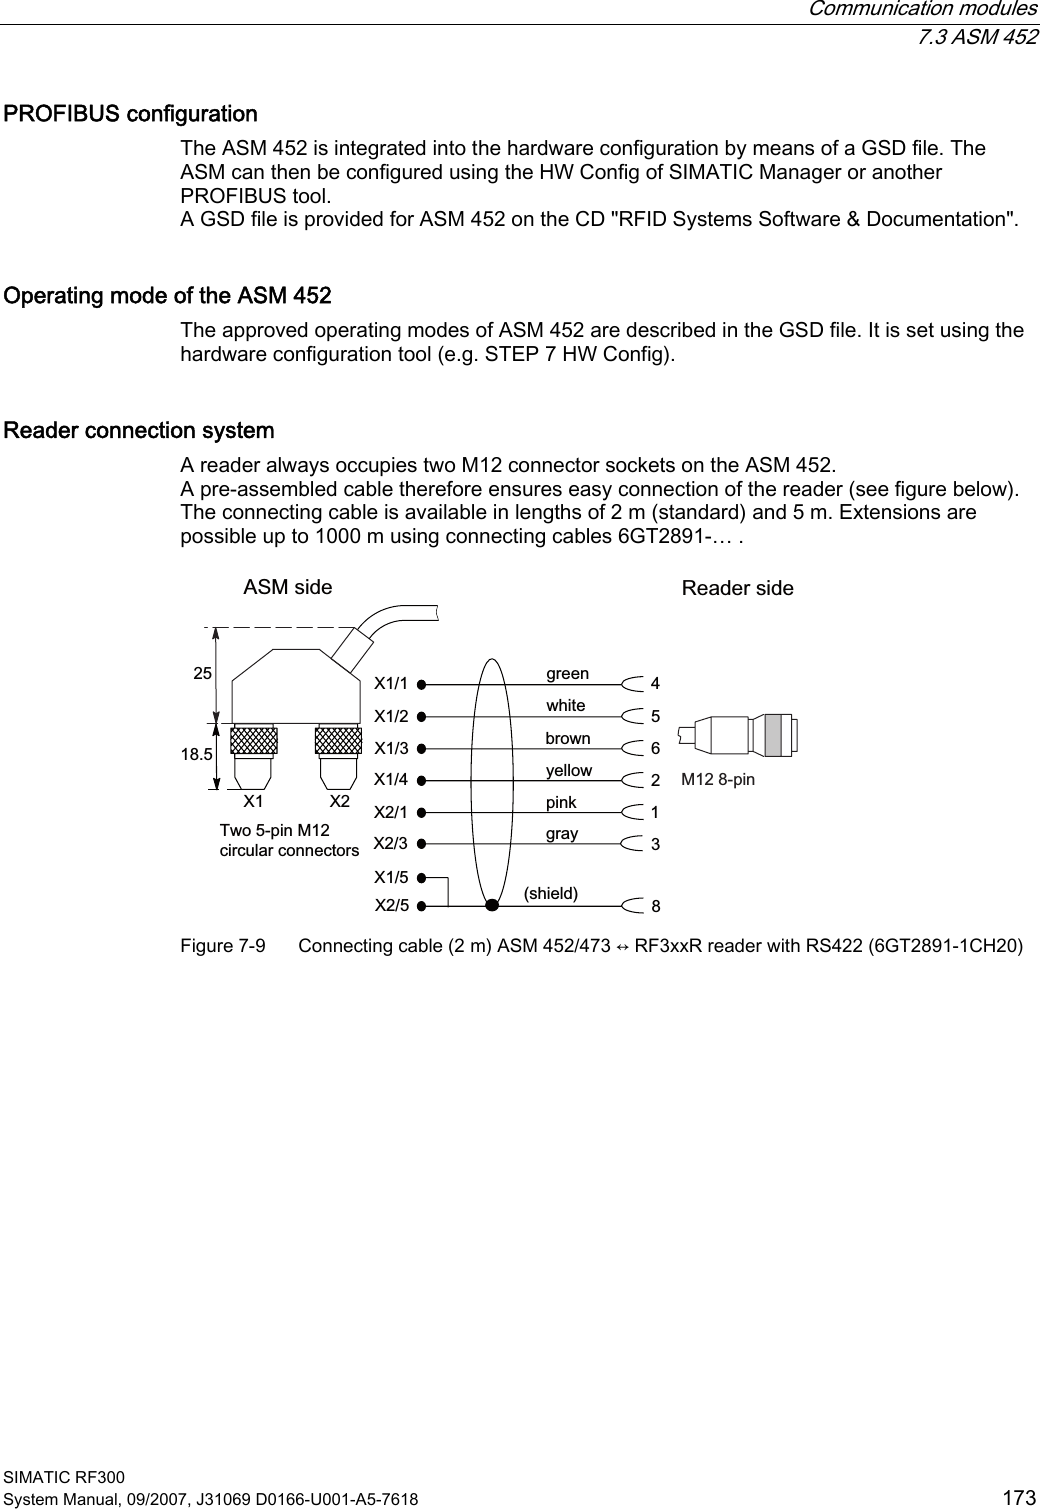  Communication modules  7.3 ASM 452 SIMATIC RF300 System Manual, 09/2007, J31069 D0166-U001-A5-7618  173 PROFIBUS configuration The ASM 452 is integrated into the hardware configuration by means of a GSD file. The ASM can then be configured using the HW Config of SIMATIC Manager or another PROFIBUS tool. A GSD file is provided for ASM 452 on the CD &quot;RFID Systems Software &amp; Documentation&quot;. Operating mode of the ASM 452 The approved operating modes of ASM 452 are described in the GSD file. It is set using the hardware configuration tool (e.g. STEP 7 HW Config). Reader connection system A reader always occupies two M12 connector sockets on the ASM 452. A pre-assembled cable therefore ensures easy connection of the reader (see figure below). The connecting cable is available in lengths of 2 m (standard) and 5 m. Extensions are possible up to 1000 m using connecting cables 6GT2891-… .  JUD\JUHHQZKLWHEURZQ\HOORZSLQNVKLHOG7ZRSLQ0FLUFXODUFRQQHFWRUV$60VLGH 5HDGHUVLGH0SLQ ;;;;;;; ; ;; Figure 7-9  Connecting cable (2 m) ASM 452/473 ↔ RF3xxR reader with RS422 (6GT2891-1CH20)  